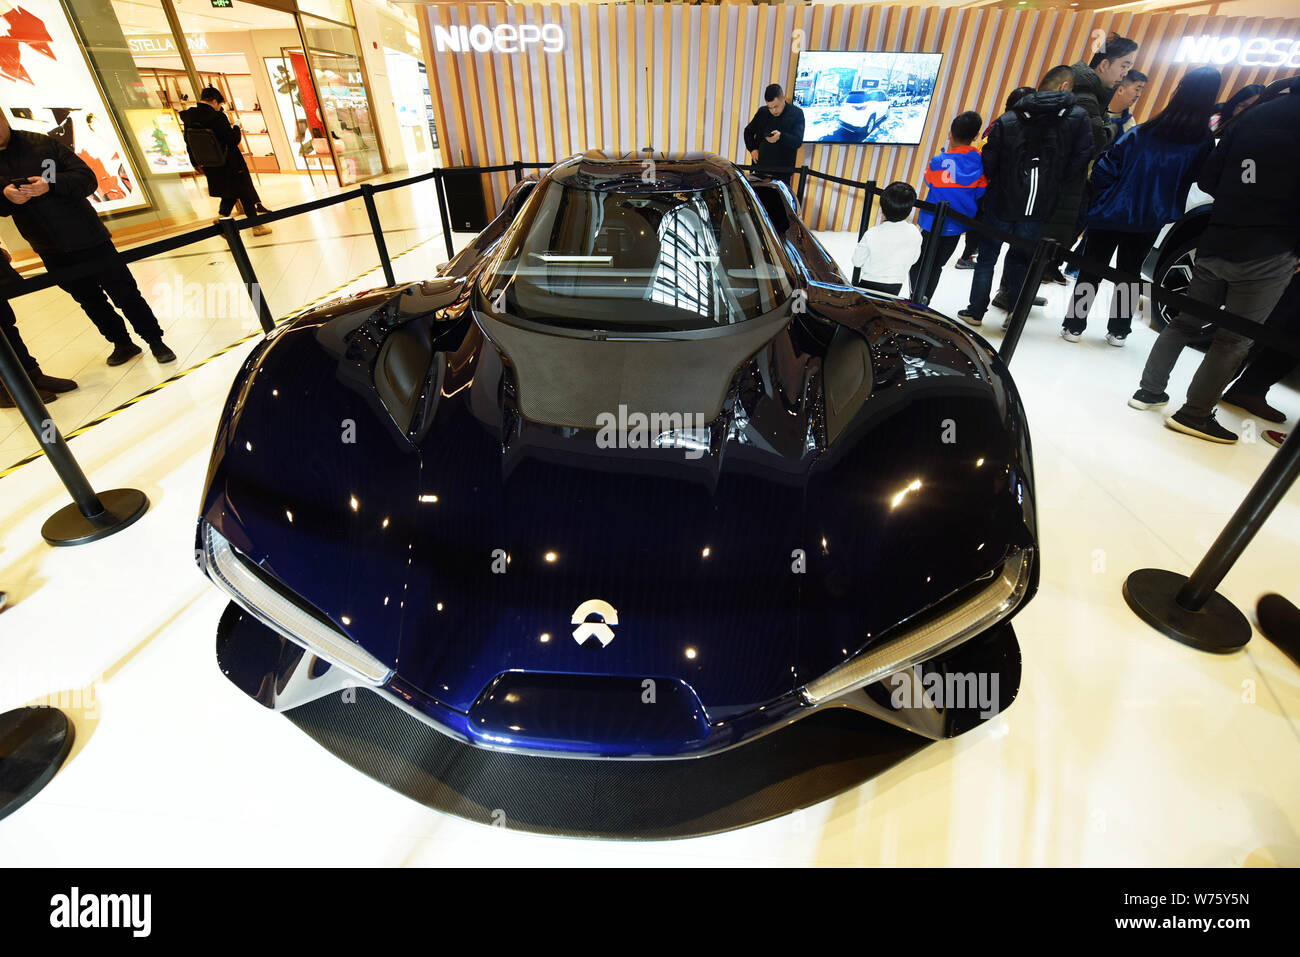 One of the first batch of the six world's fastest electric supercar NextEV Nio EP9 owned by Lei Jun, Chairman and CEO of Xiaomi Technology and Chairma Stock Photo